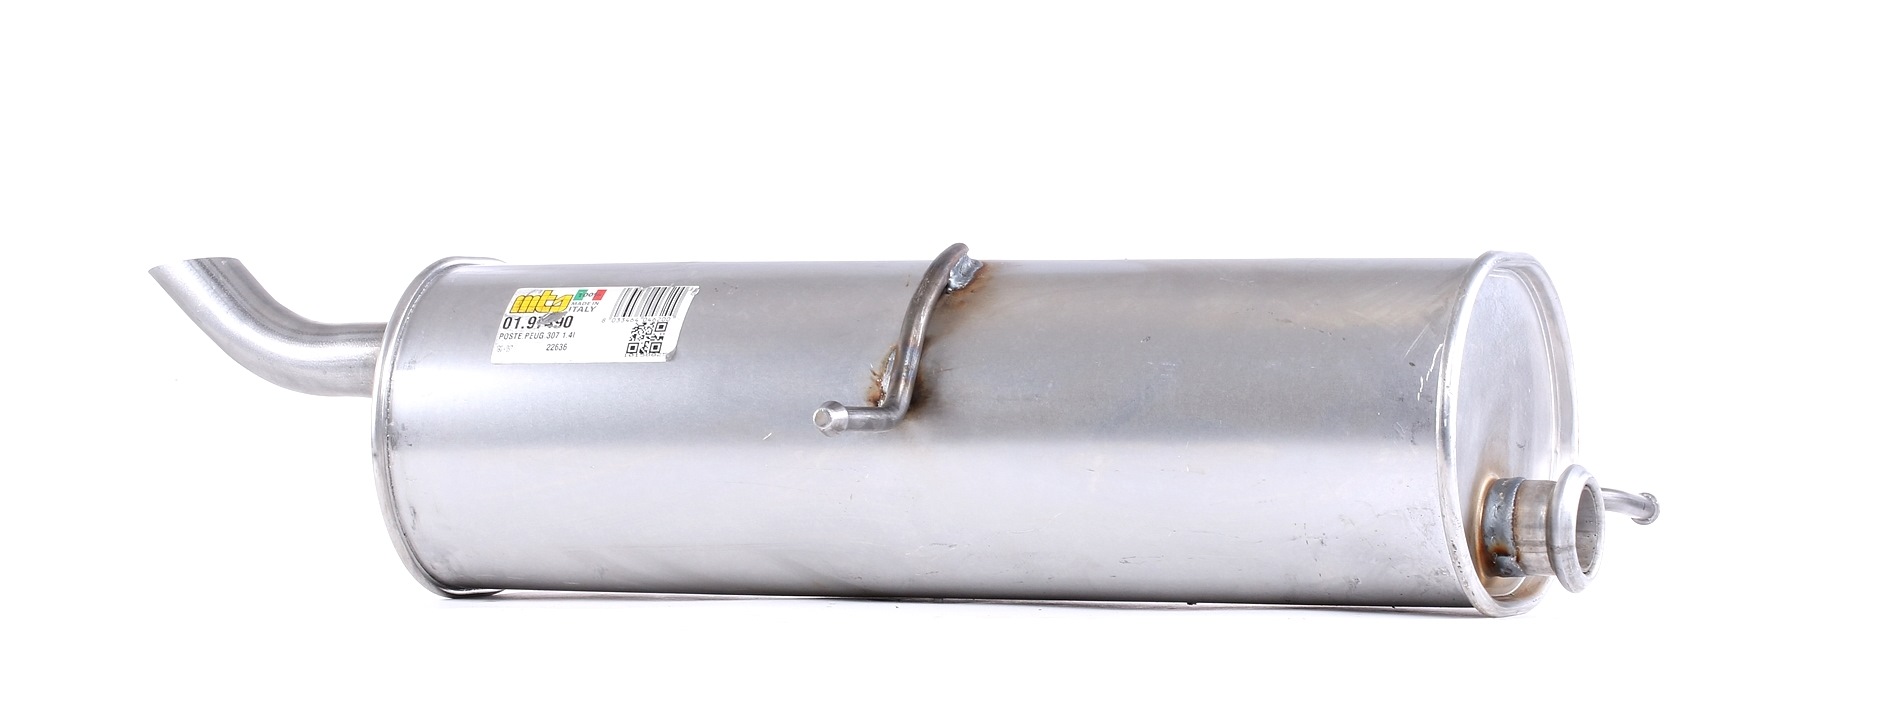 MTS Exhaust muffler universal and sports Peugeot 309 2 new 01.97490